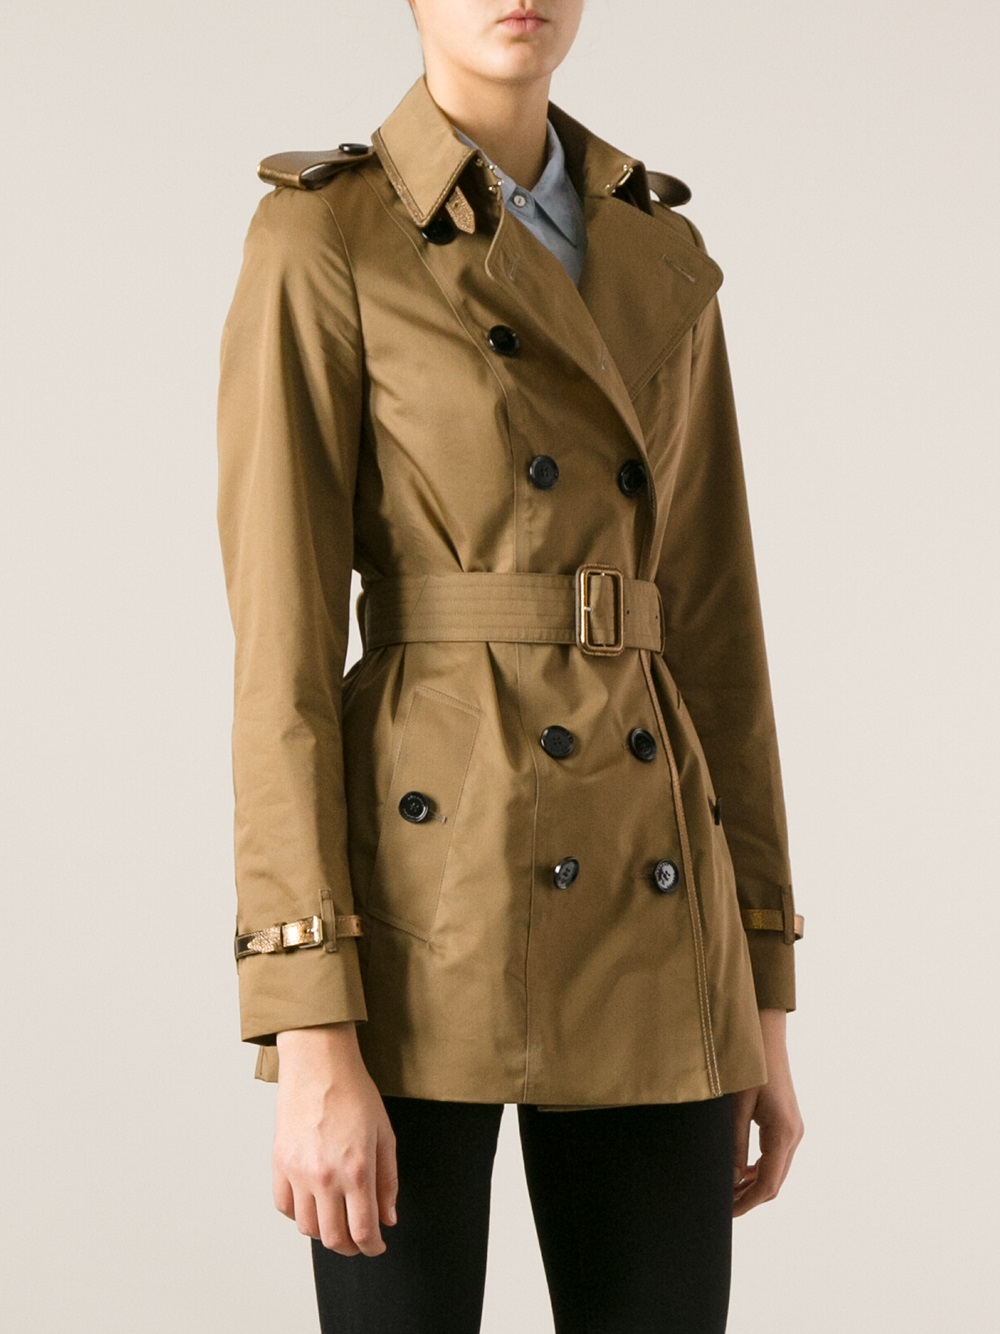 Burberry Gold Detail Trench Coat in Natural - Lyst